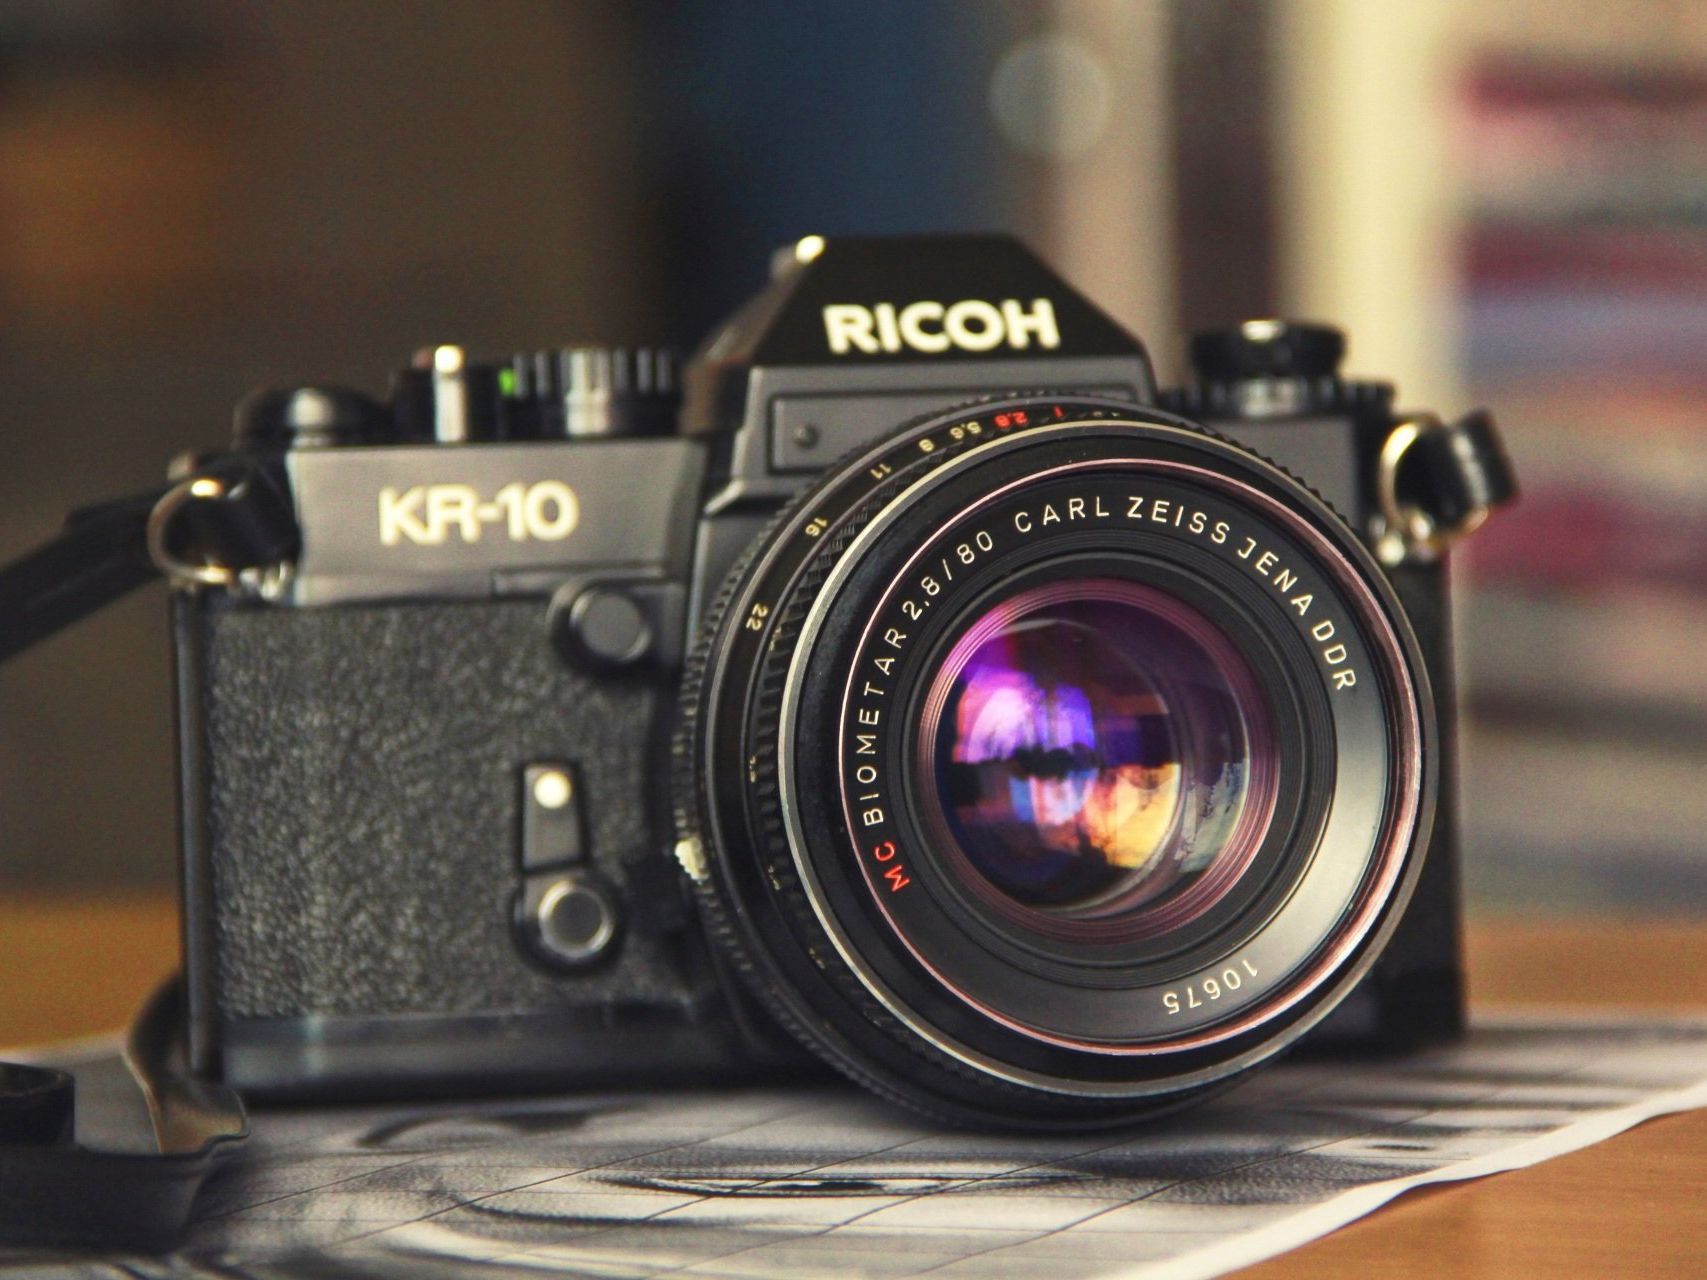 a black ricoh camera is sitting on a table .